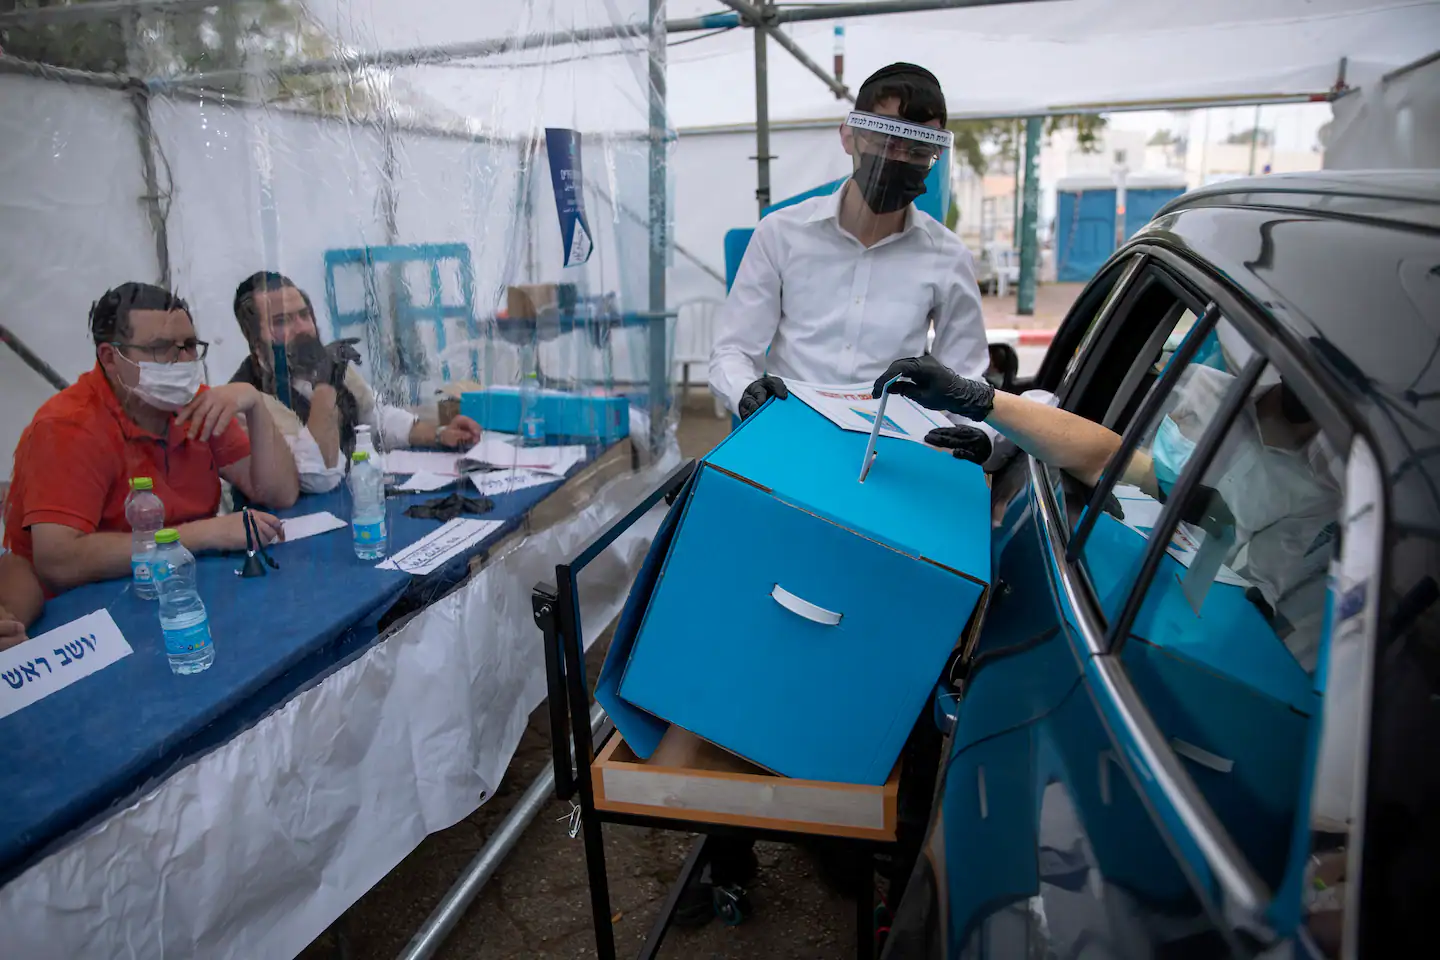  Israelis head to polls Tuesday with Netanyahu battling to remain prime minister